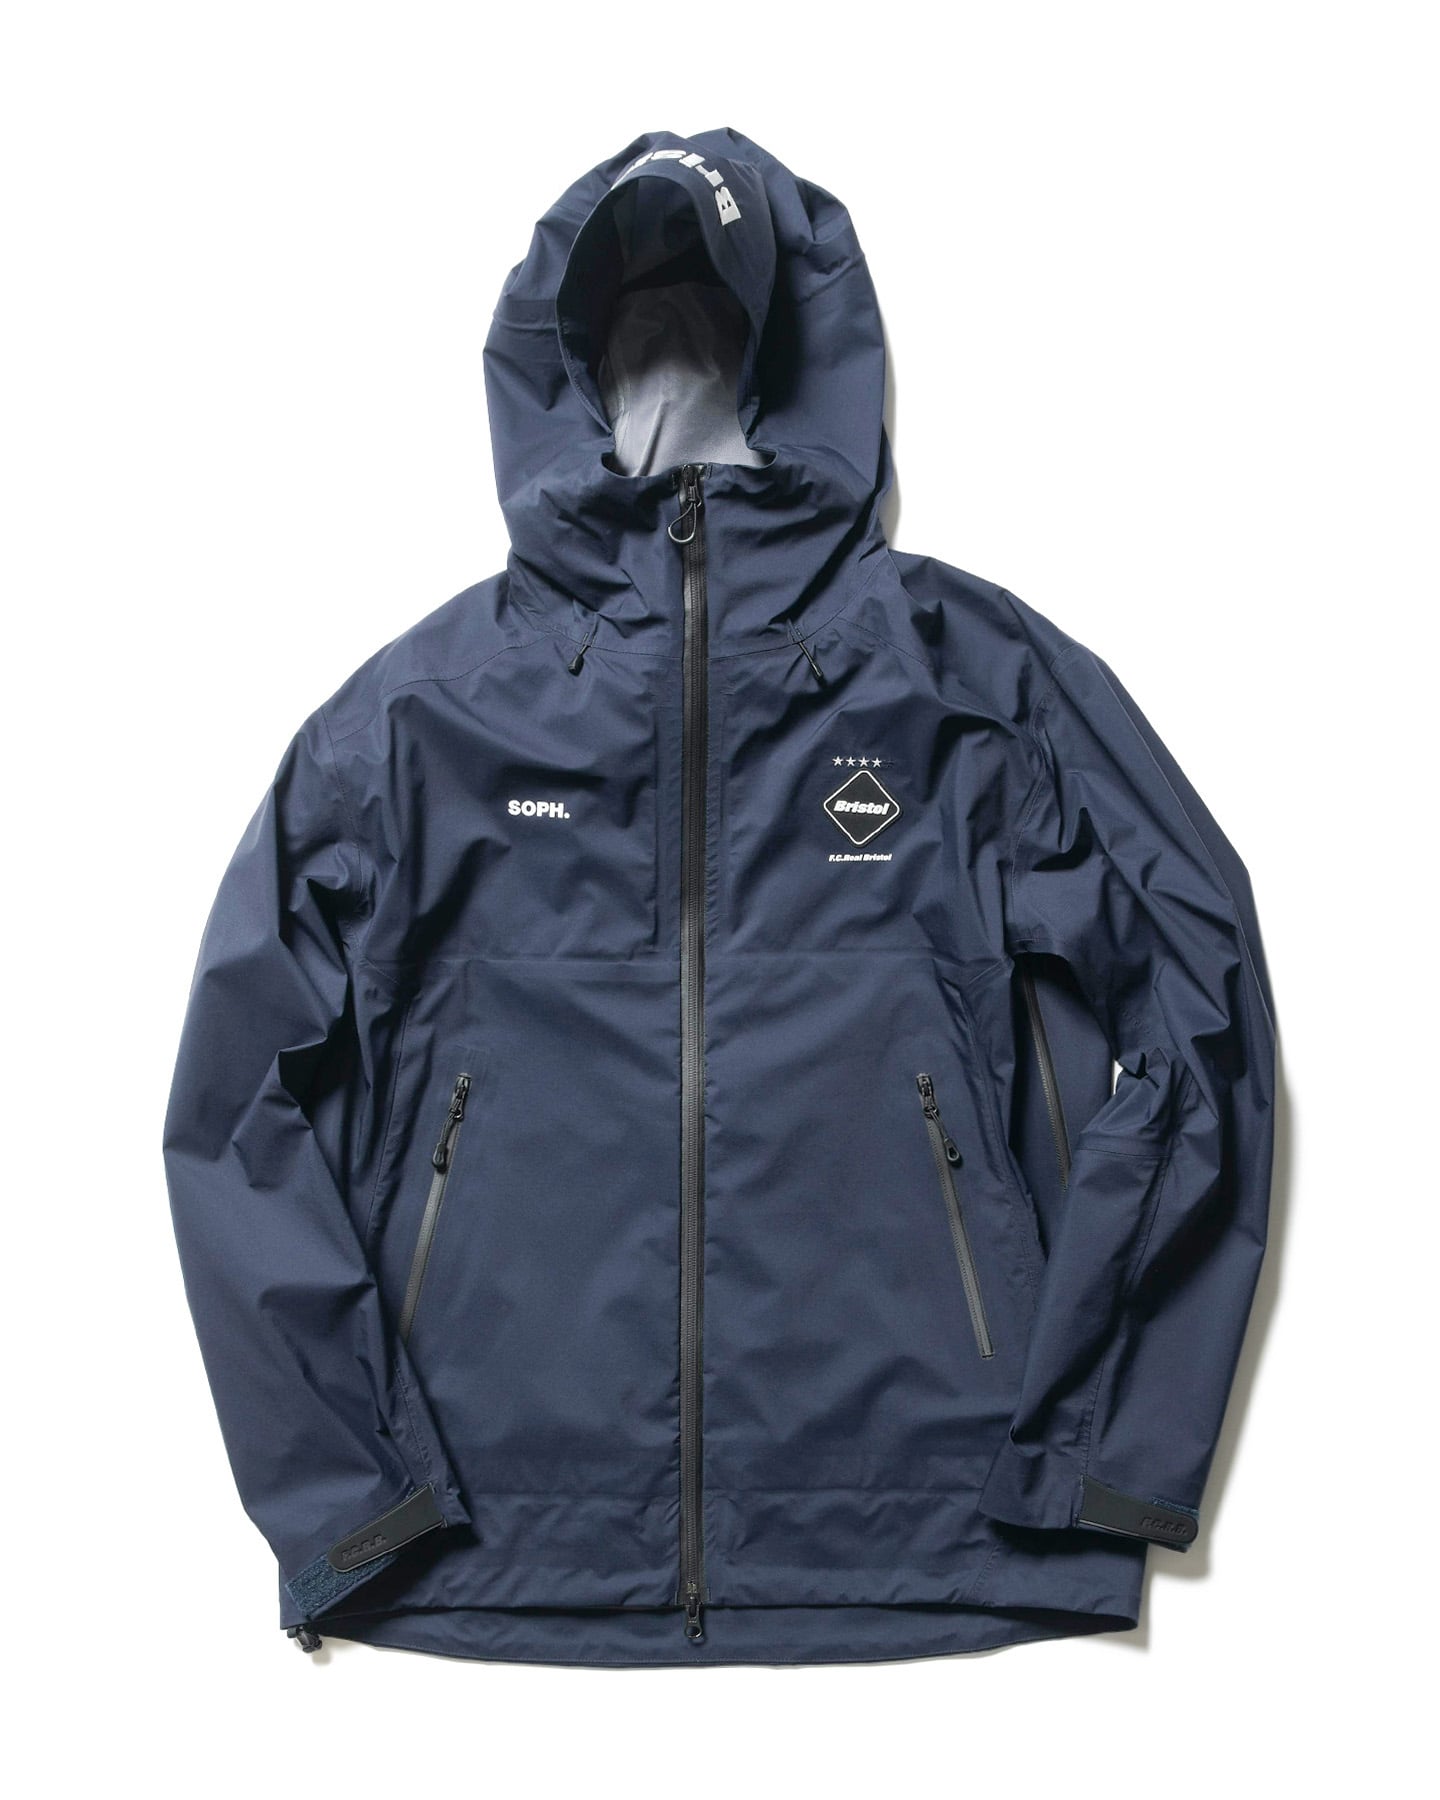 FCRB WARM UP JACKET